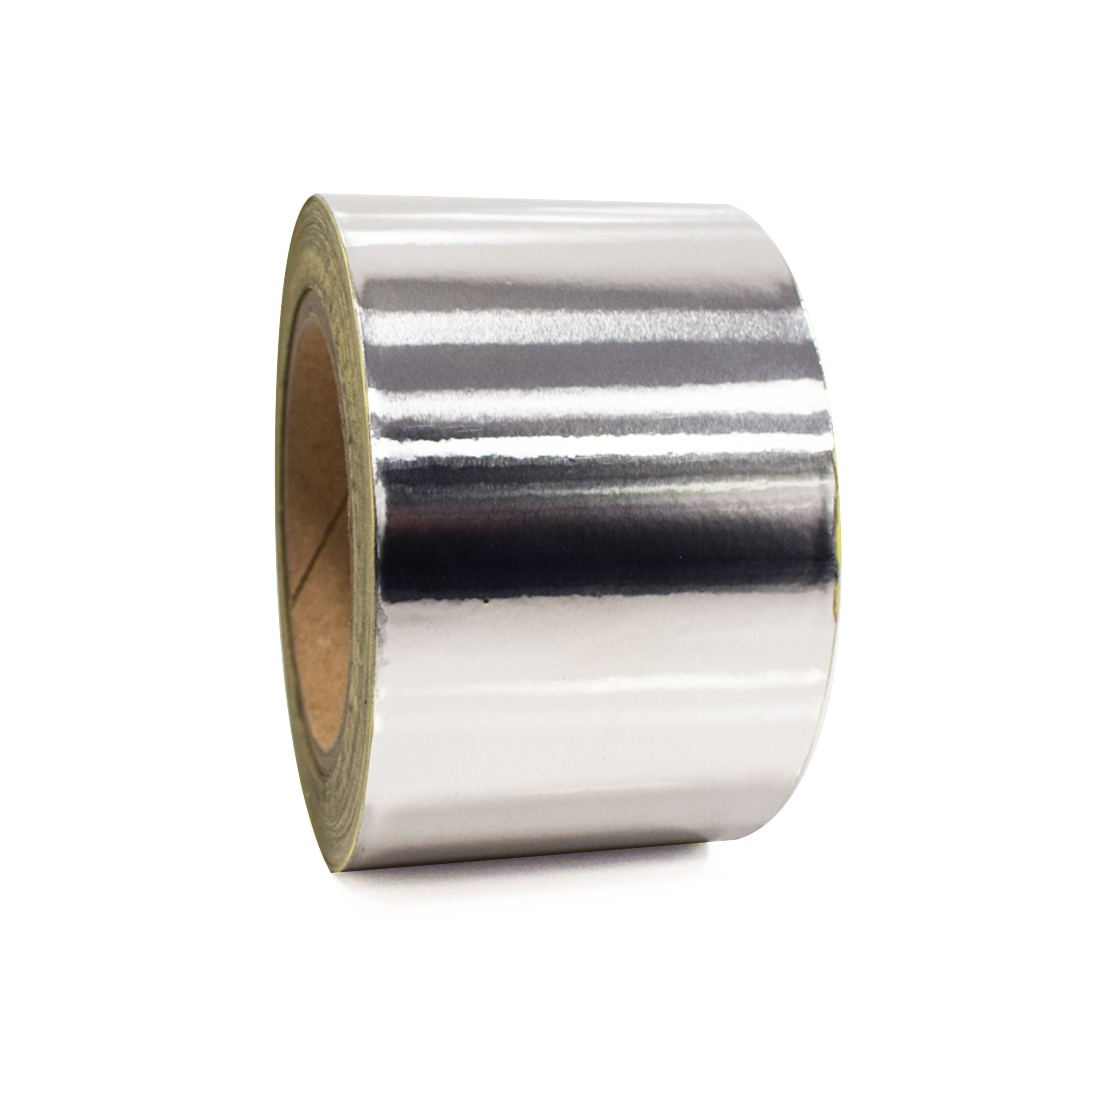 75mm Roll of Silver Foil Tape